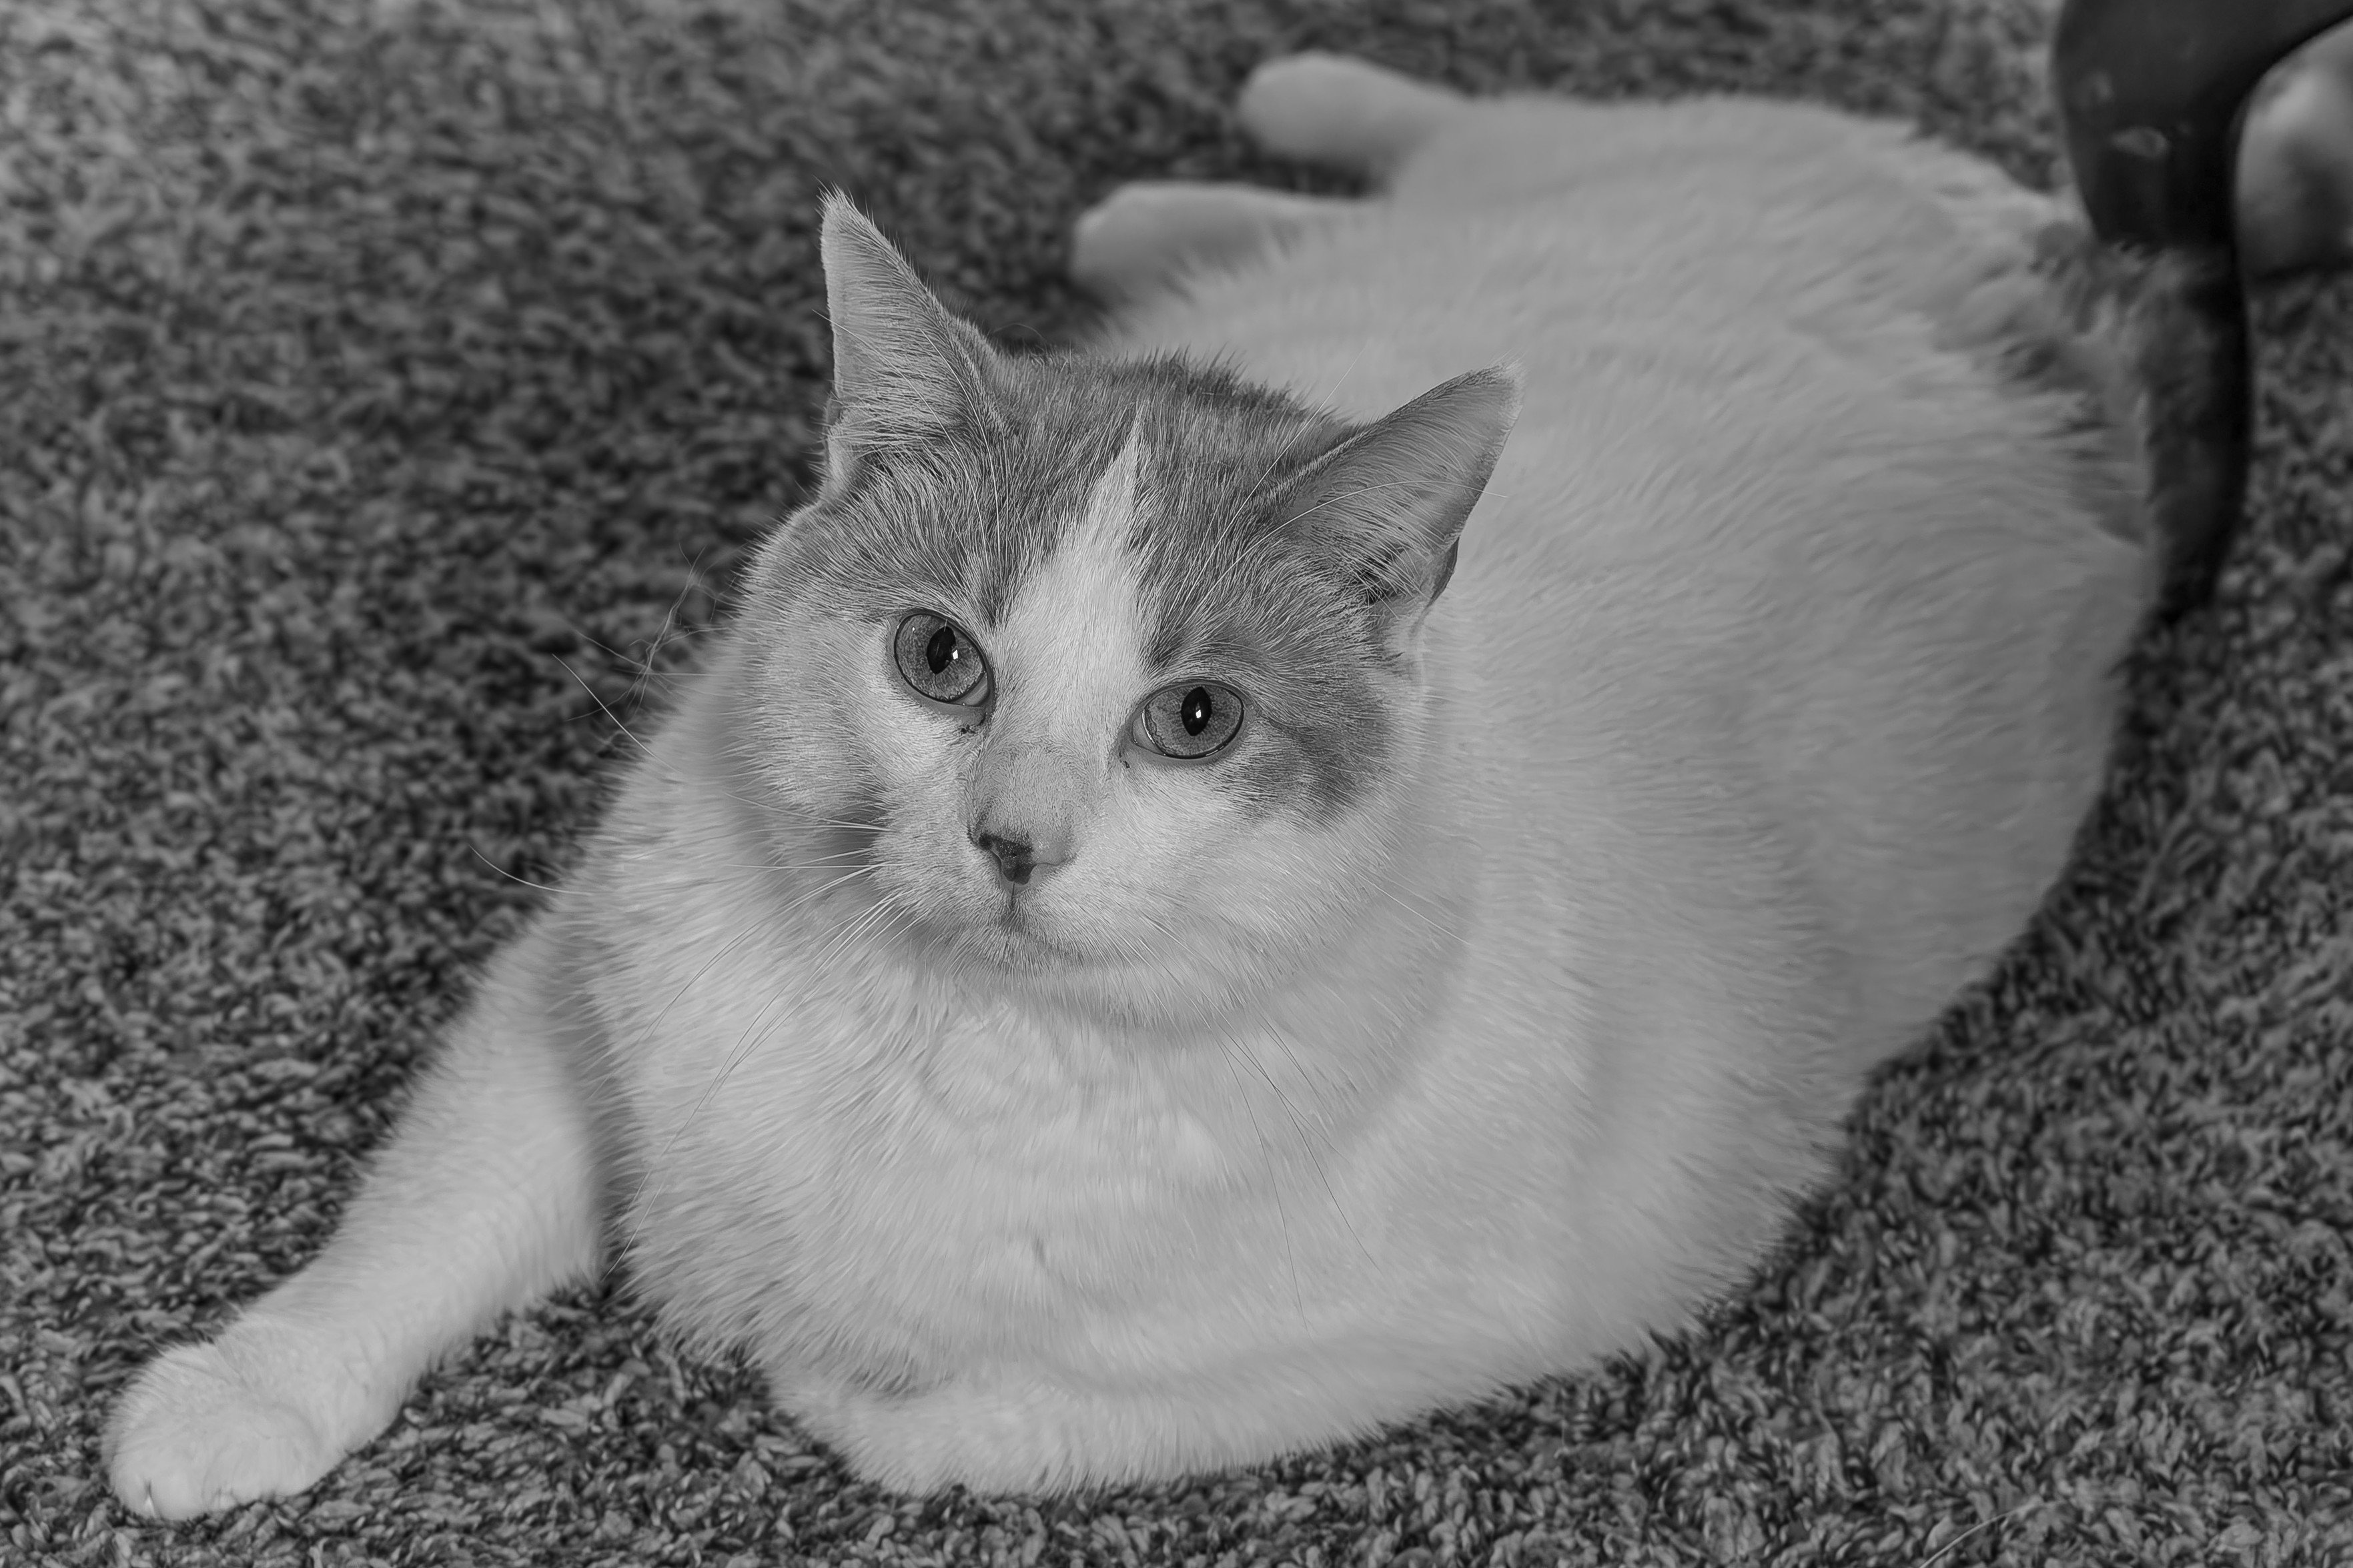 Black and white image of a cat lying on its side on a carpeted floor next to the wooden leg of a chair. The cat is looking directly into the camera and its body is laid out behind and to the right. The cat has white fur with darker fur (orange fur, in this case) around the side of the its eyes and around the ears. The cat also has a dark patch or marking on its nose. While the eye color is not distinguishable in the black and white image, the eyes are bright, clear, and friendly.